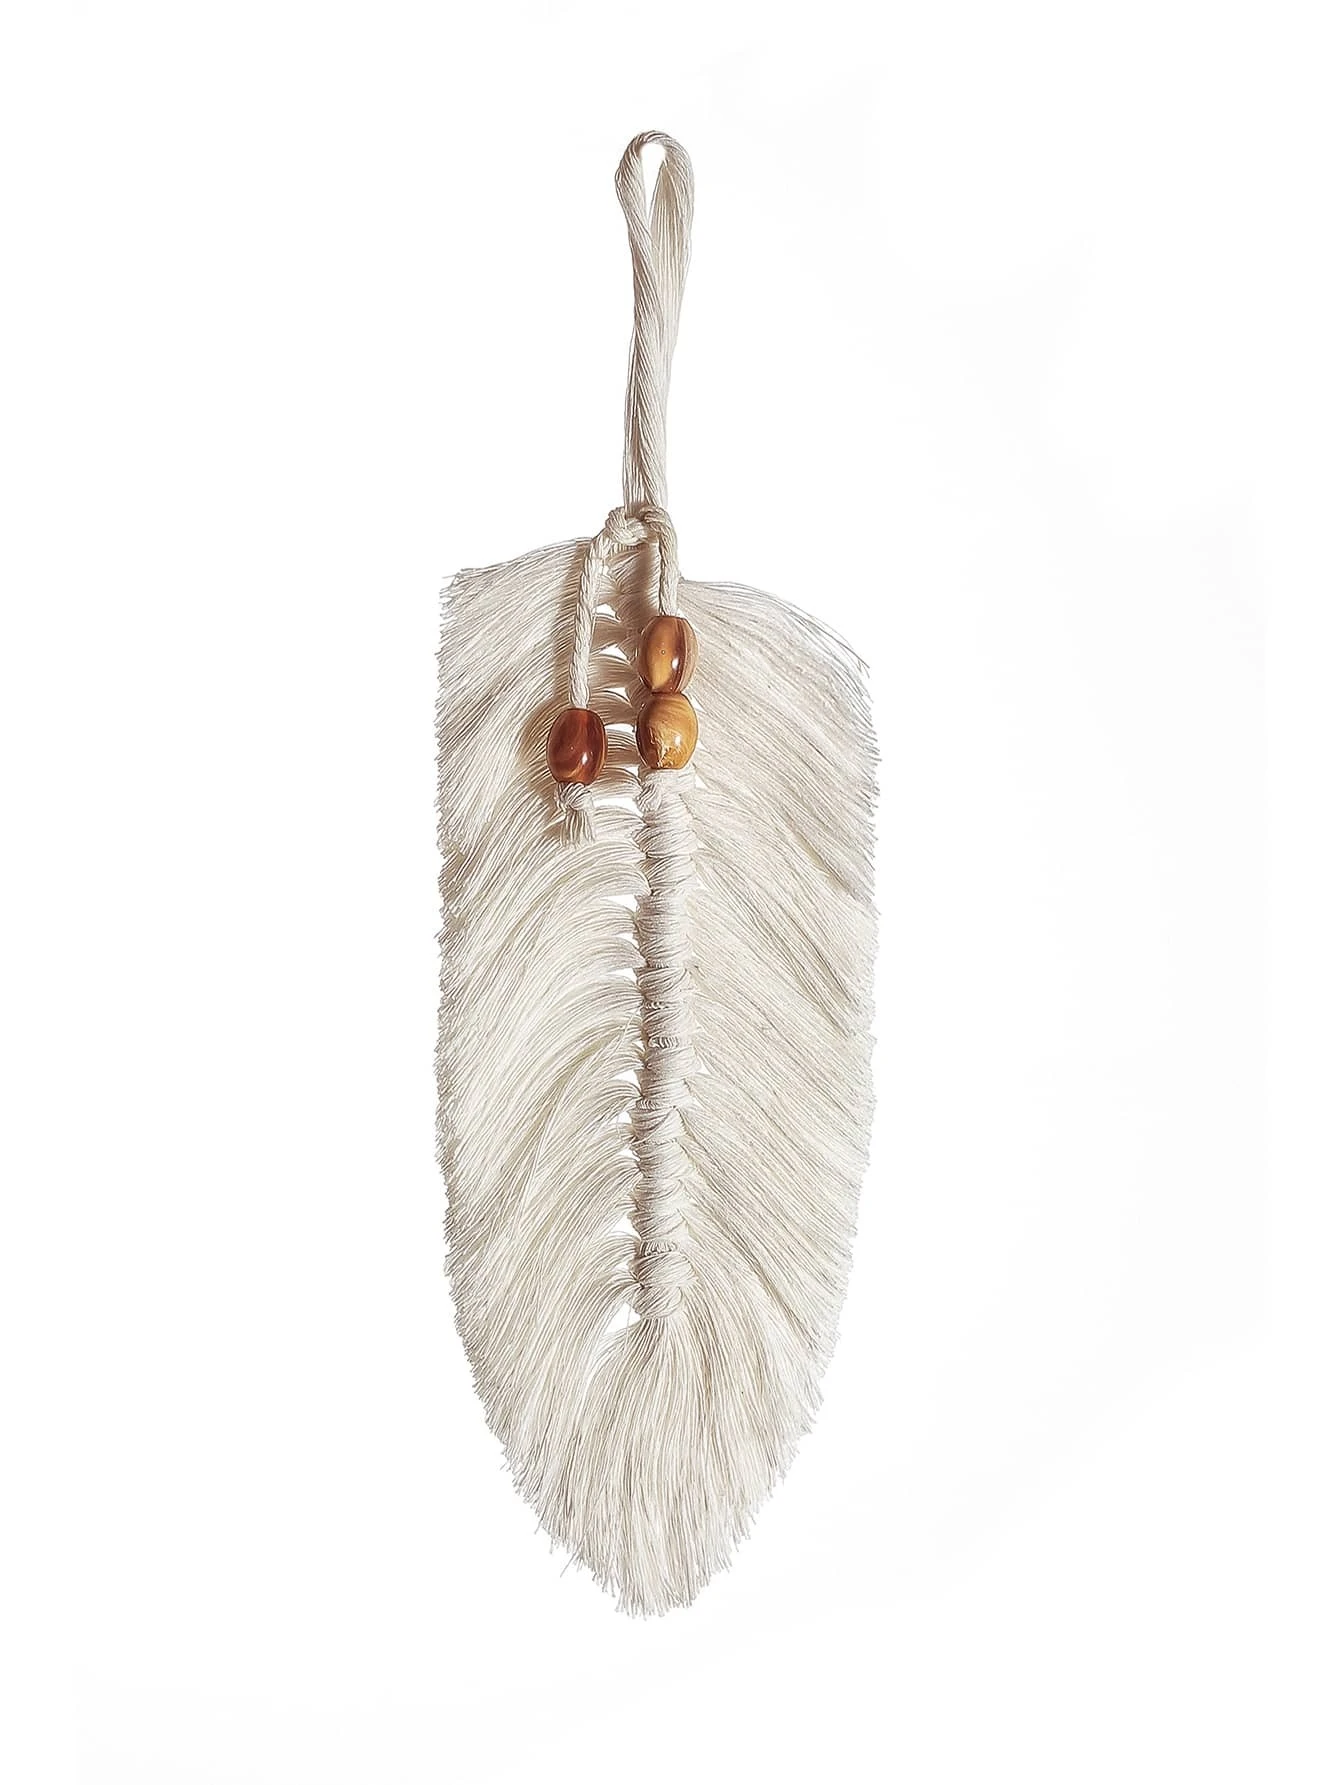 1 Pc Beige Leaf Shaped Woven Hanging